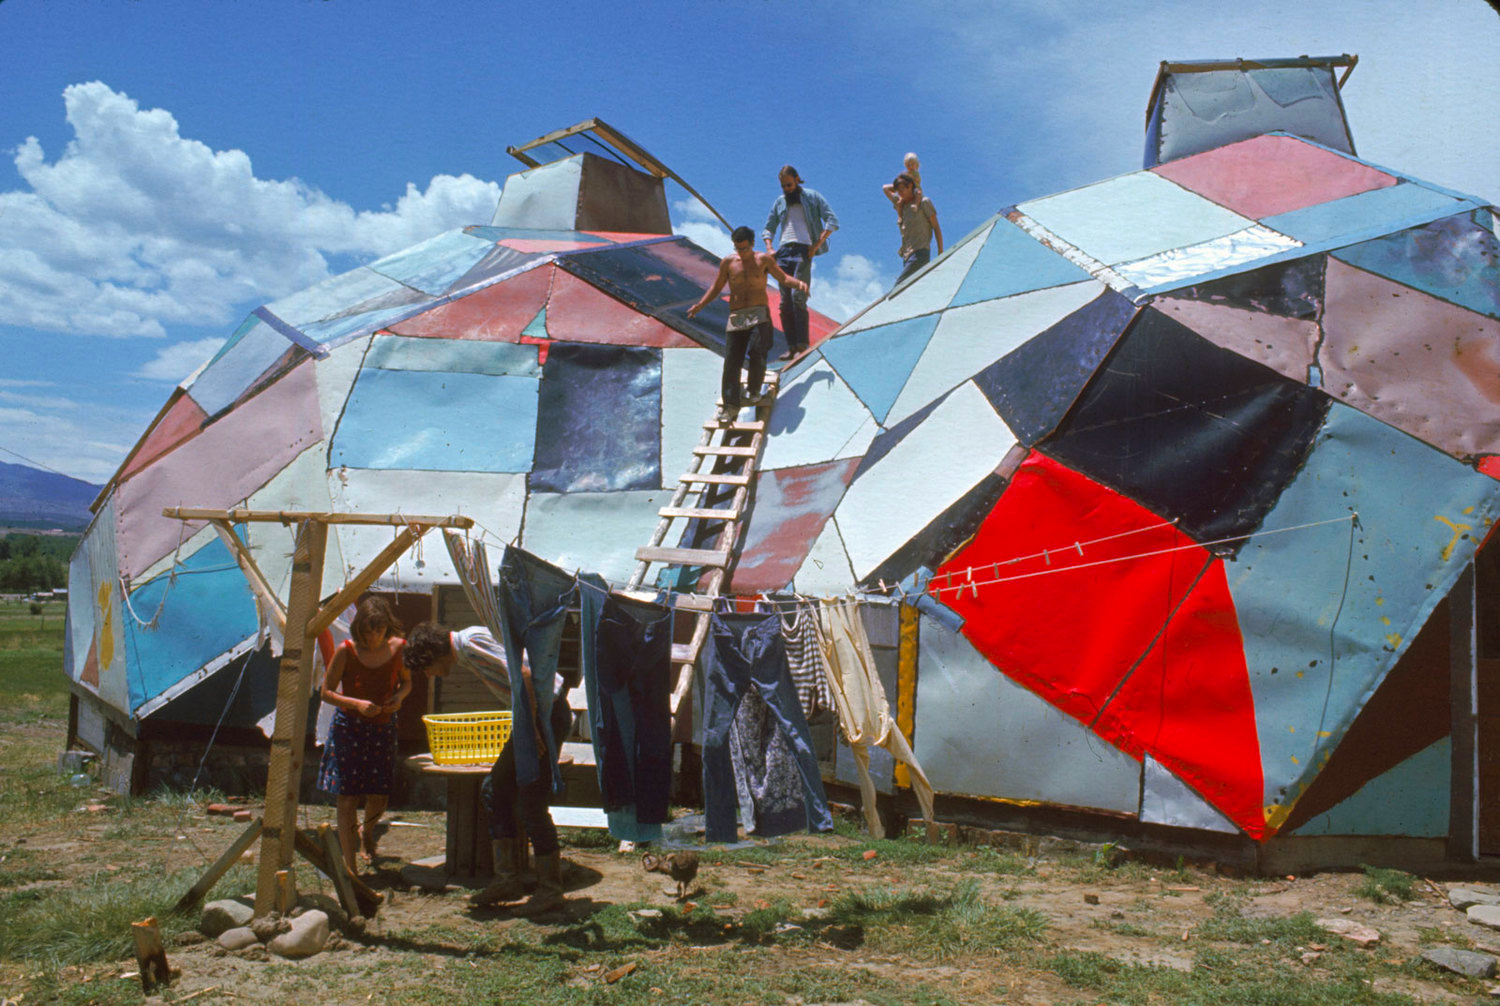 Drop City communards emerge from their makeshift geodesic dome homes in the 60s.